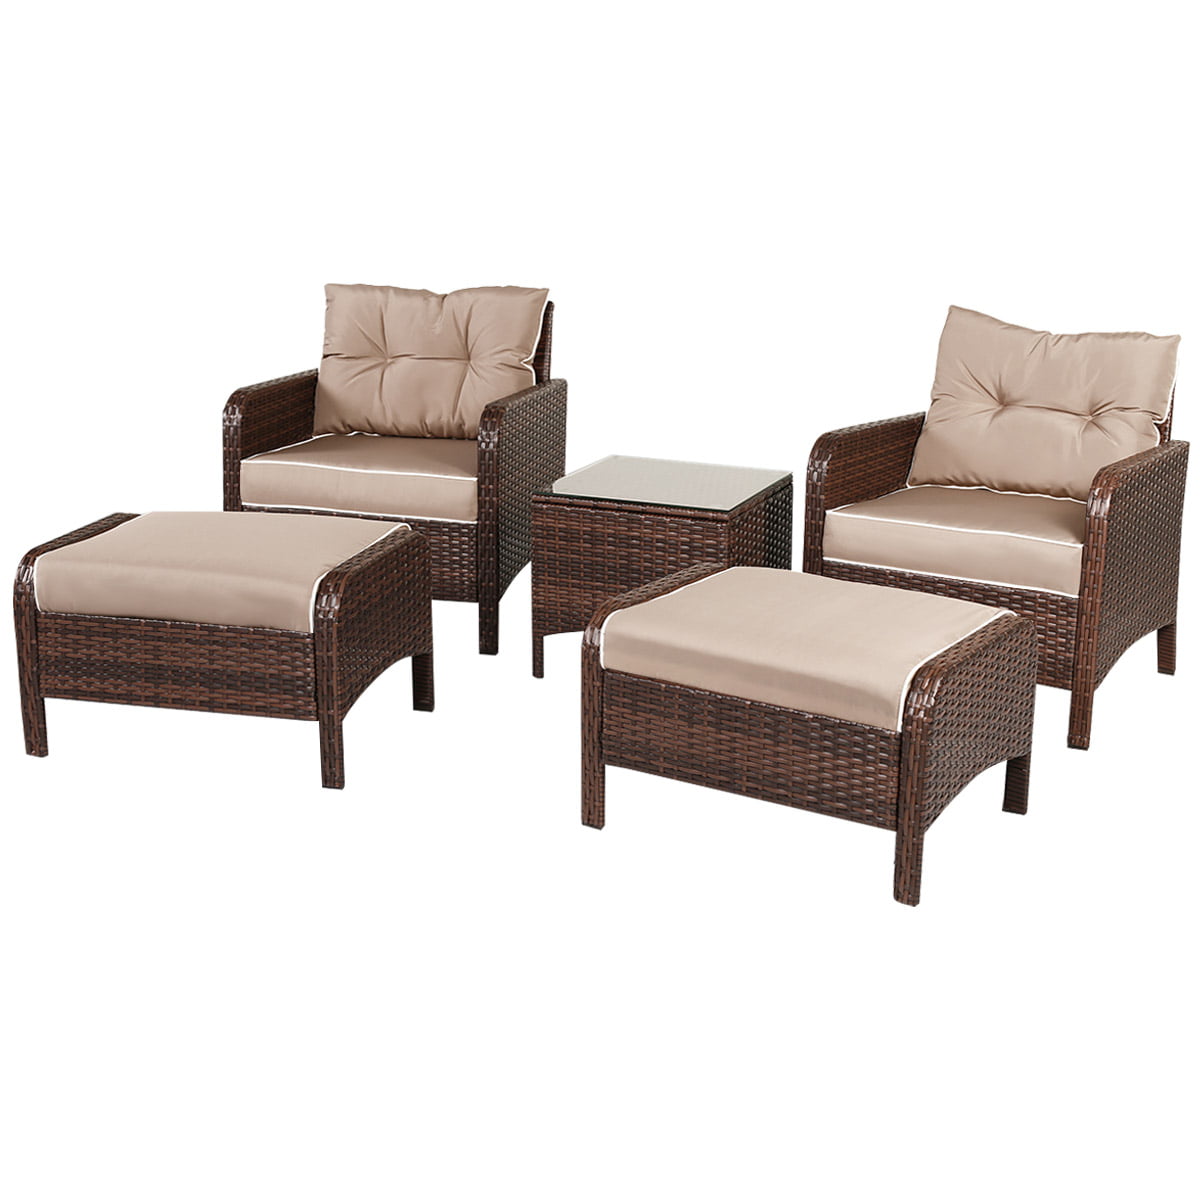 Gymax 5 PC Patio Set Sectional Rattan Wicker Furniture Set ...